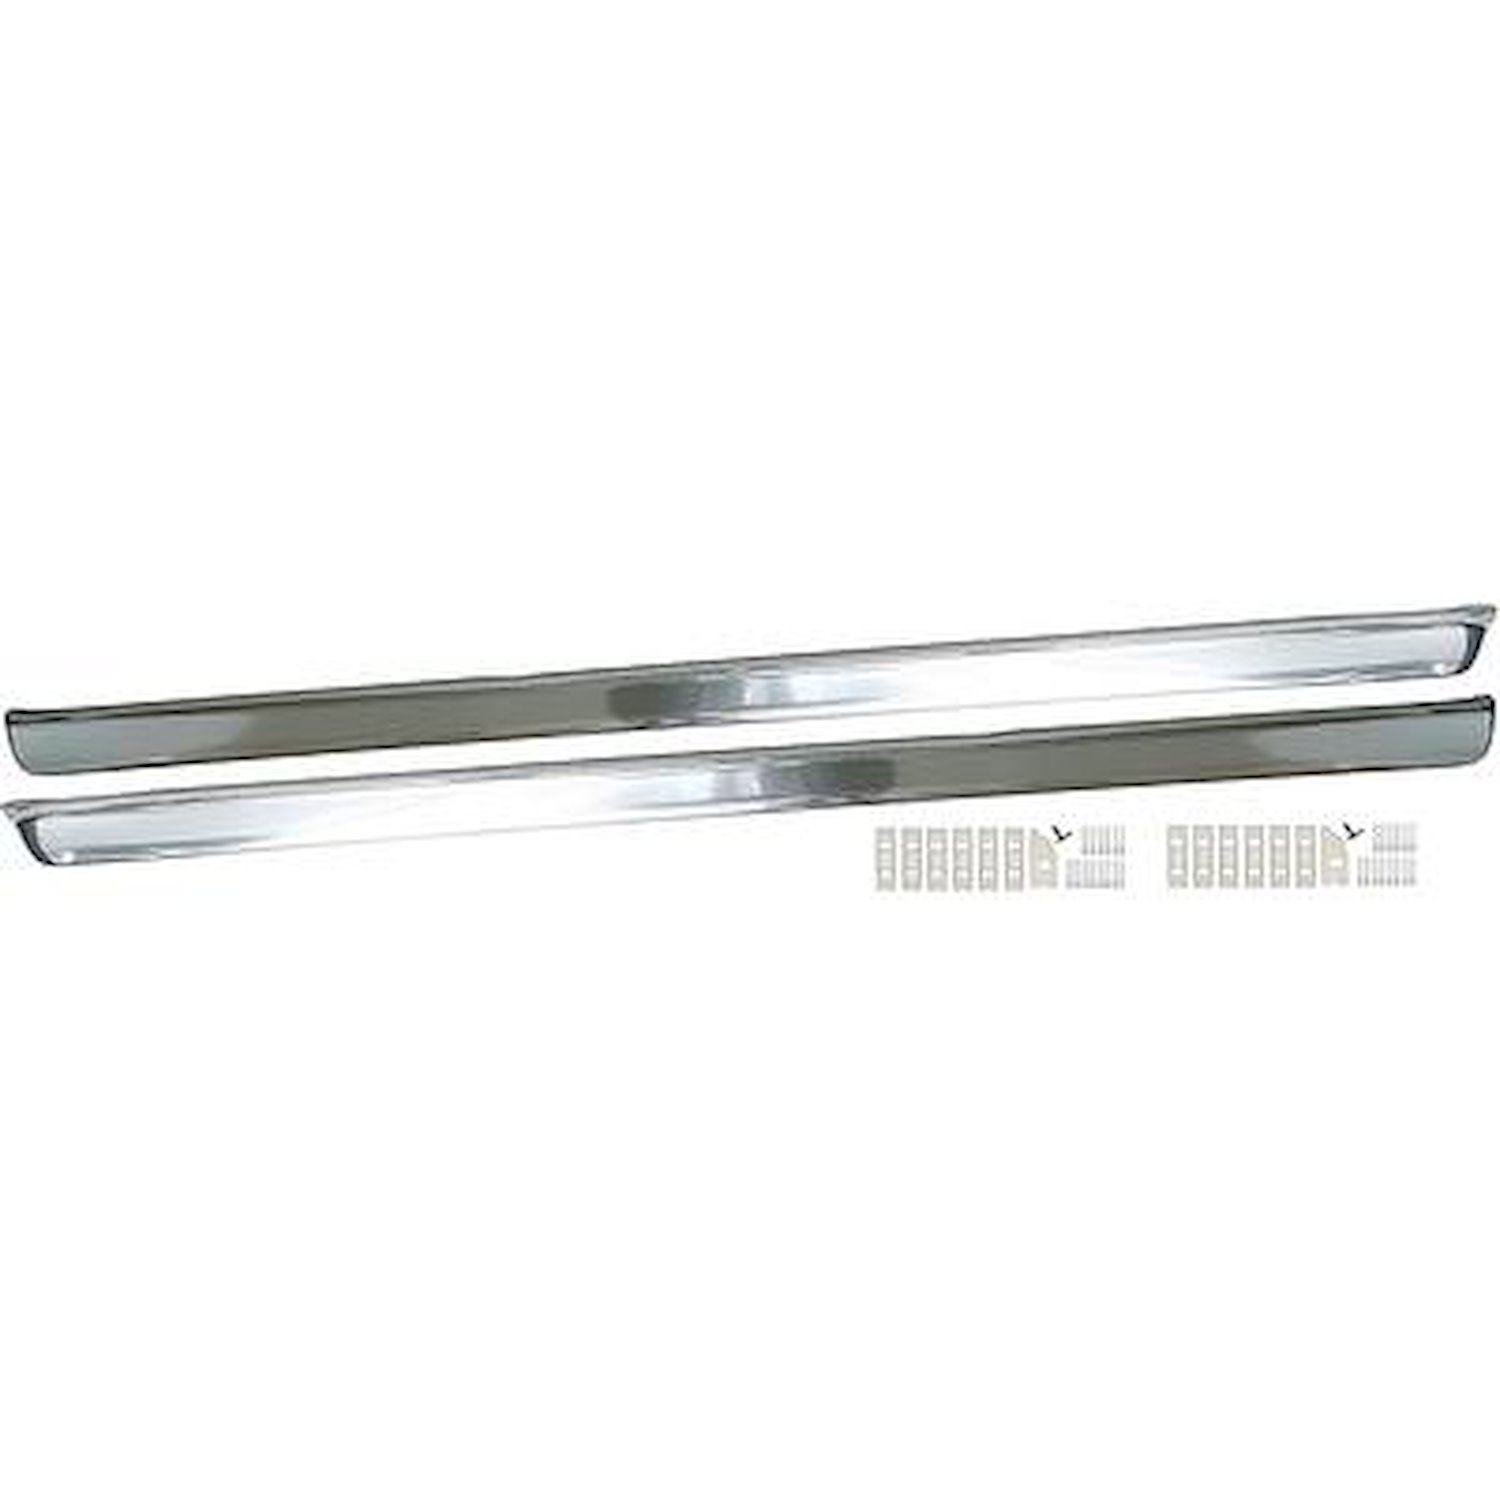 10176CD Rocker Panel Moldings 1967-68 Mustang; with Hardware; RH and LH; Pair